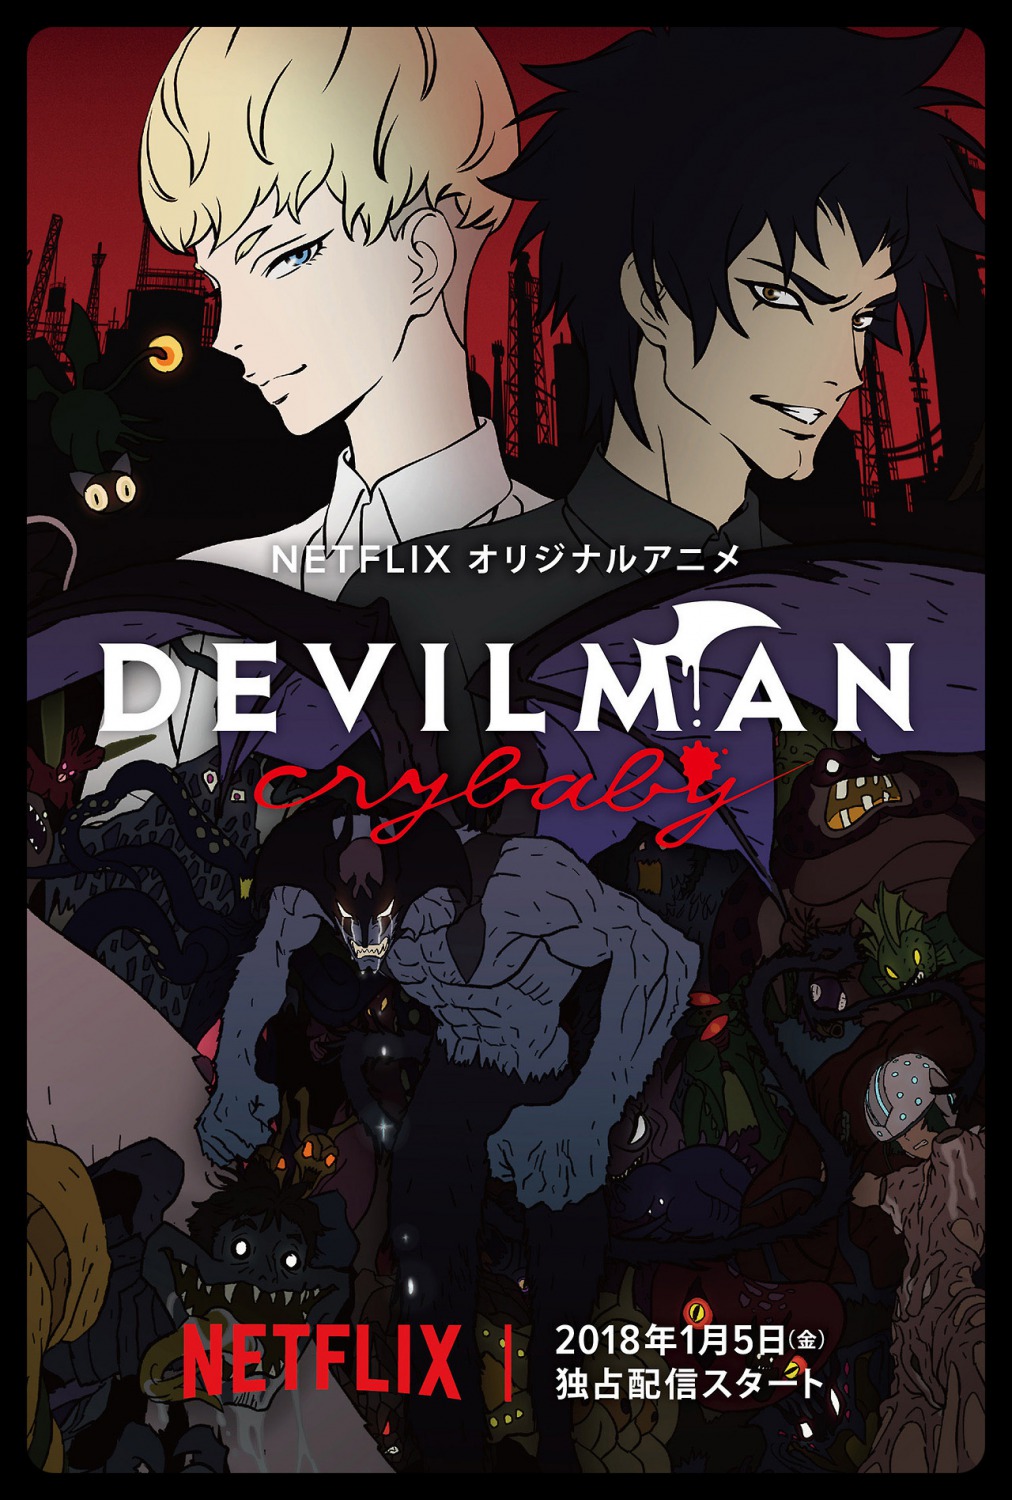 Extra Large TV Poster Image for DEVILMAN: crybaby 